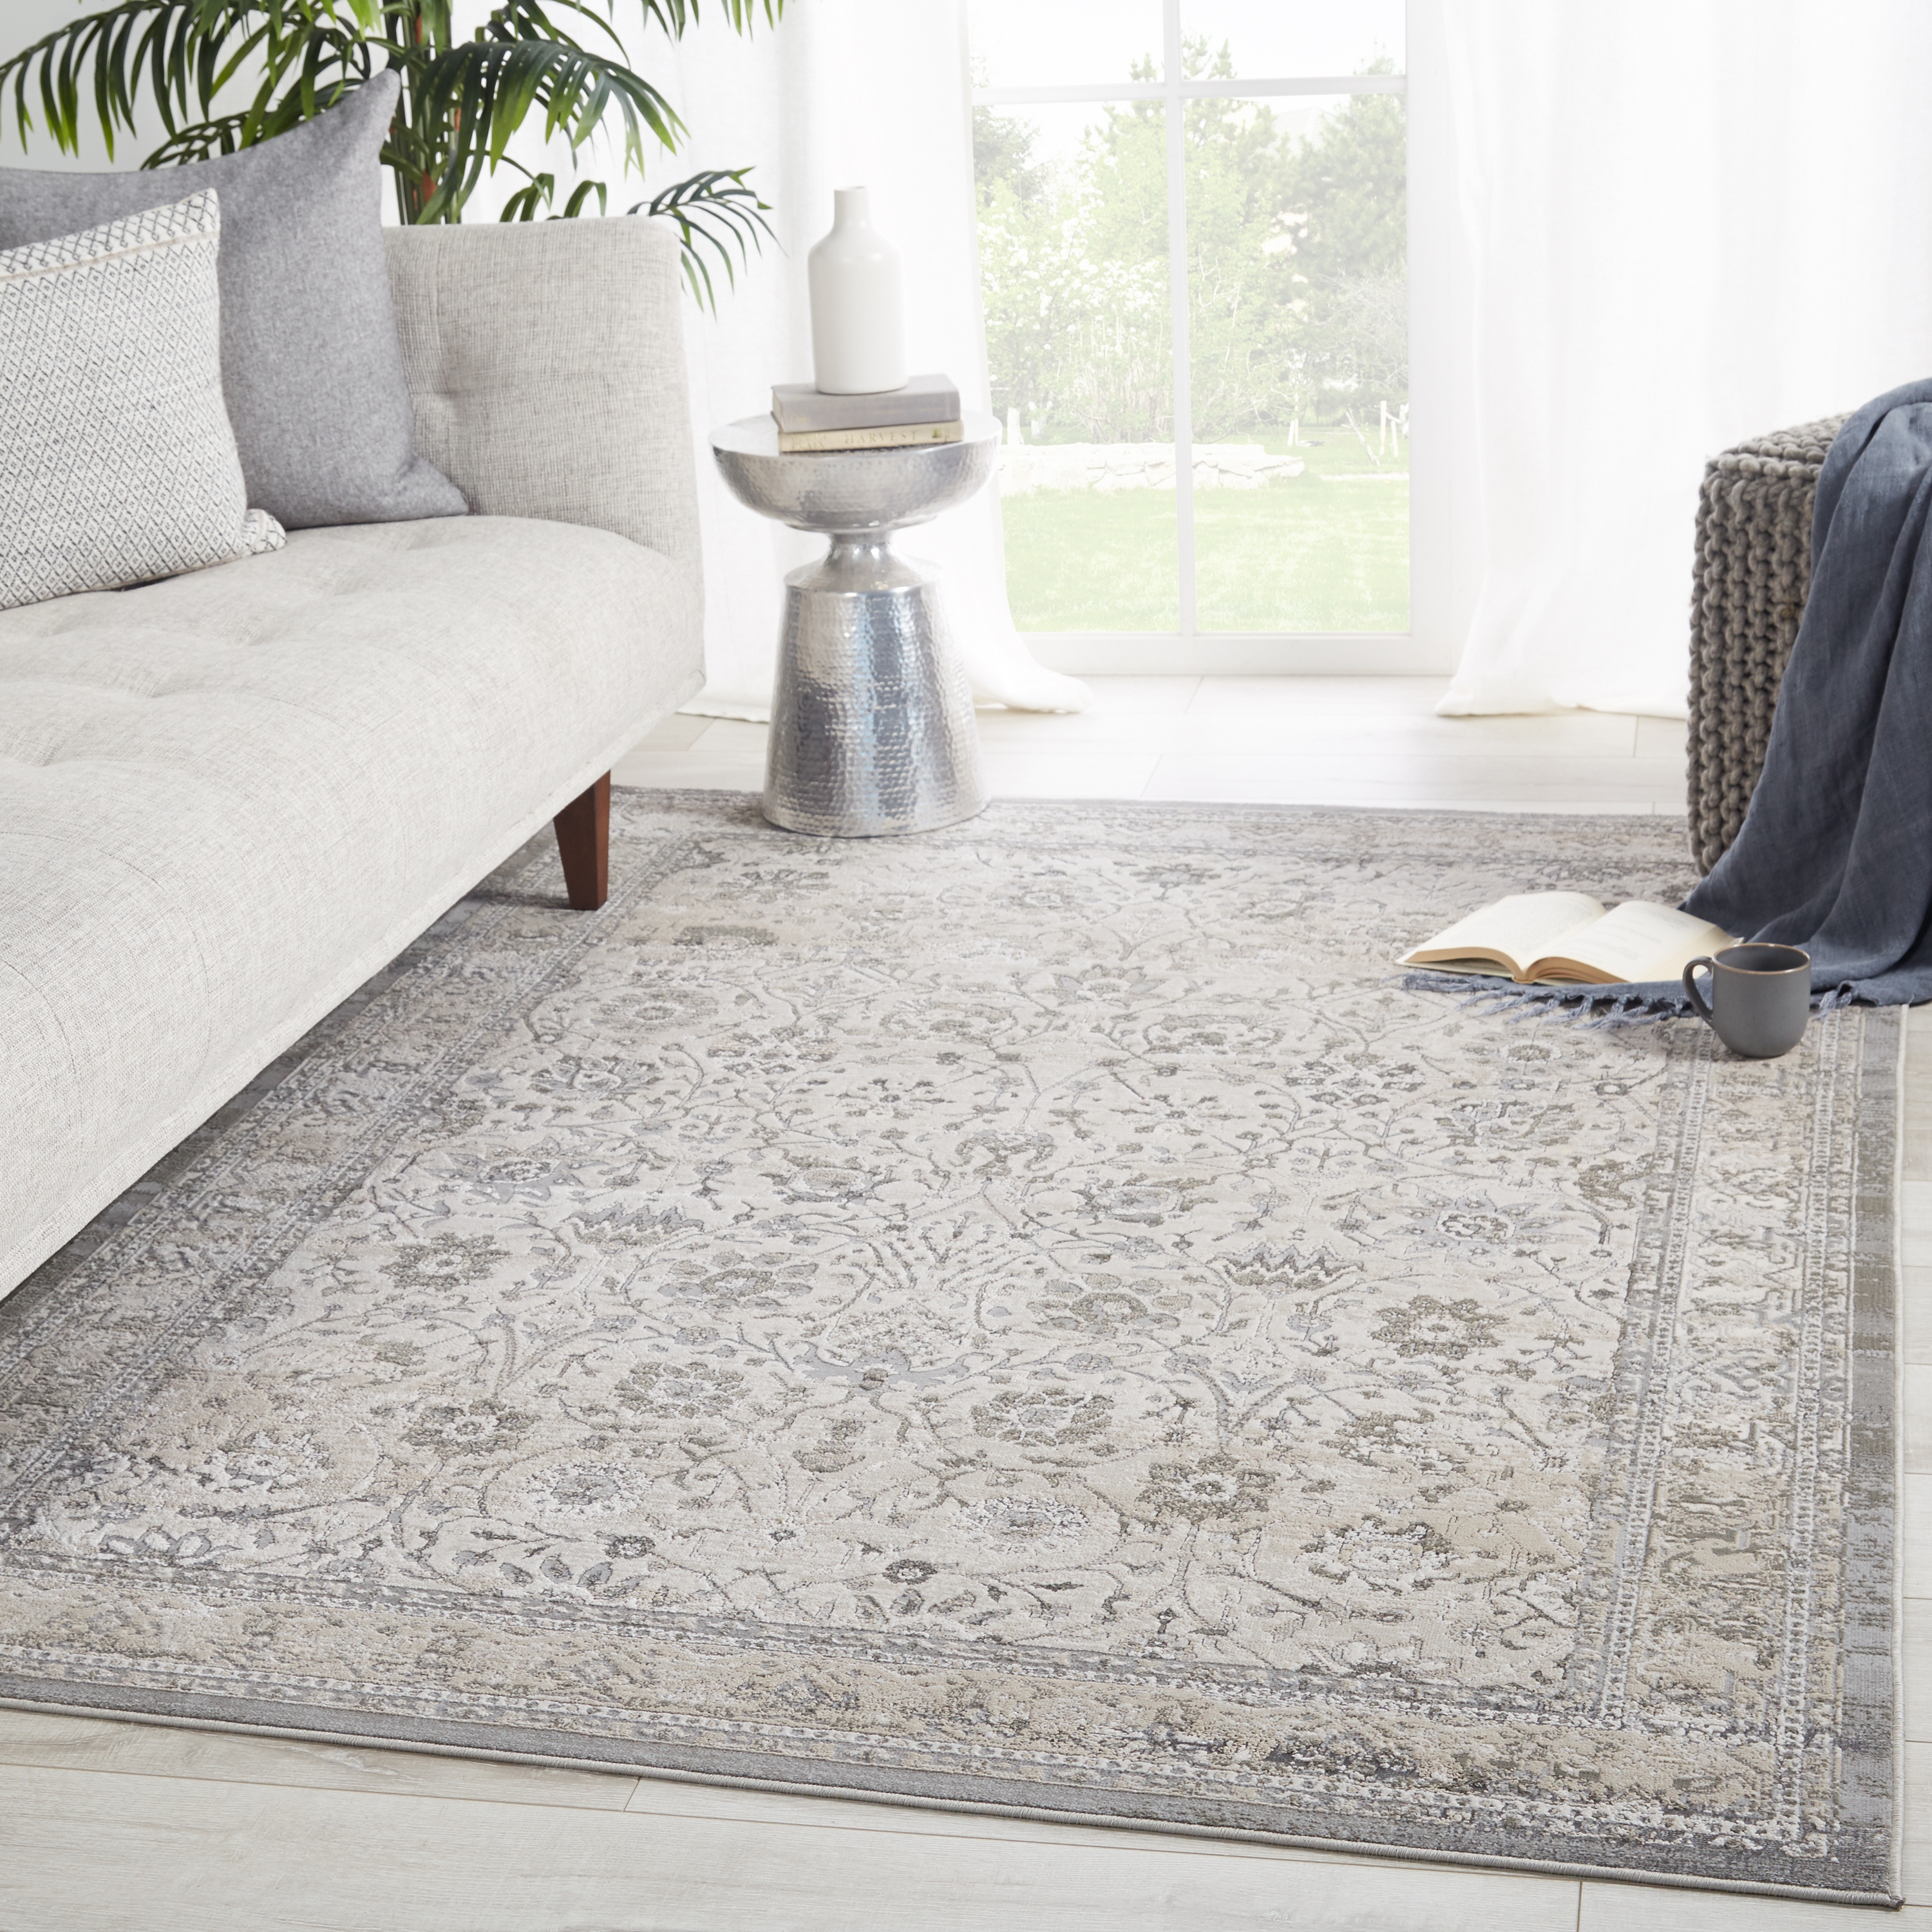 Vibe by Odel Oriental Gray/ White Area Rug (7'10"X10'6") - Image 4